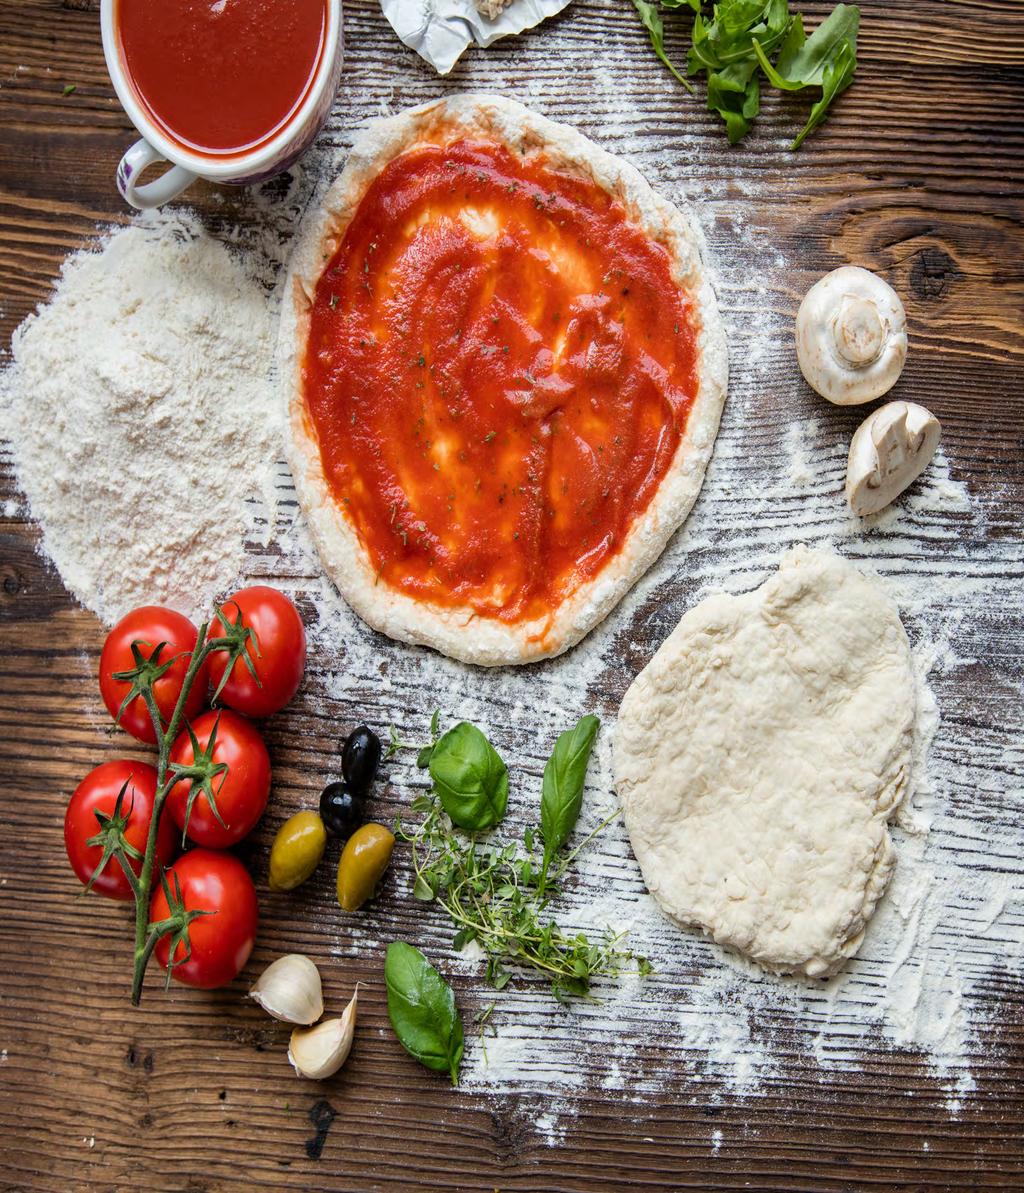 Our pizza is made us famous! All ingredients are prepared in house. Our dough is made fresh every day and each pizza is hand rolled to order.